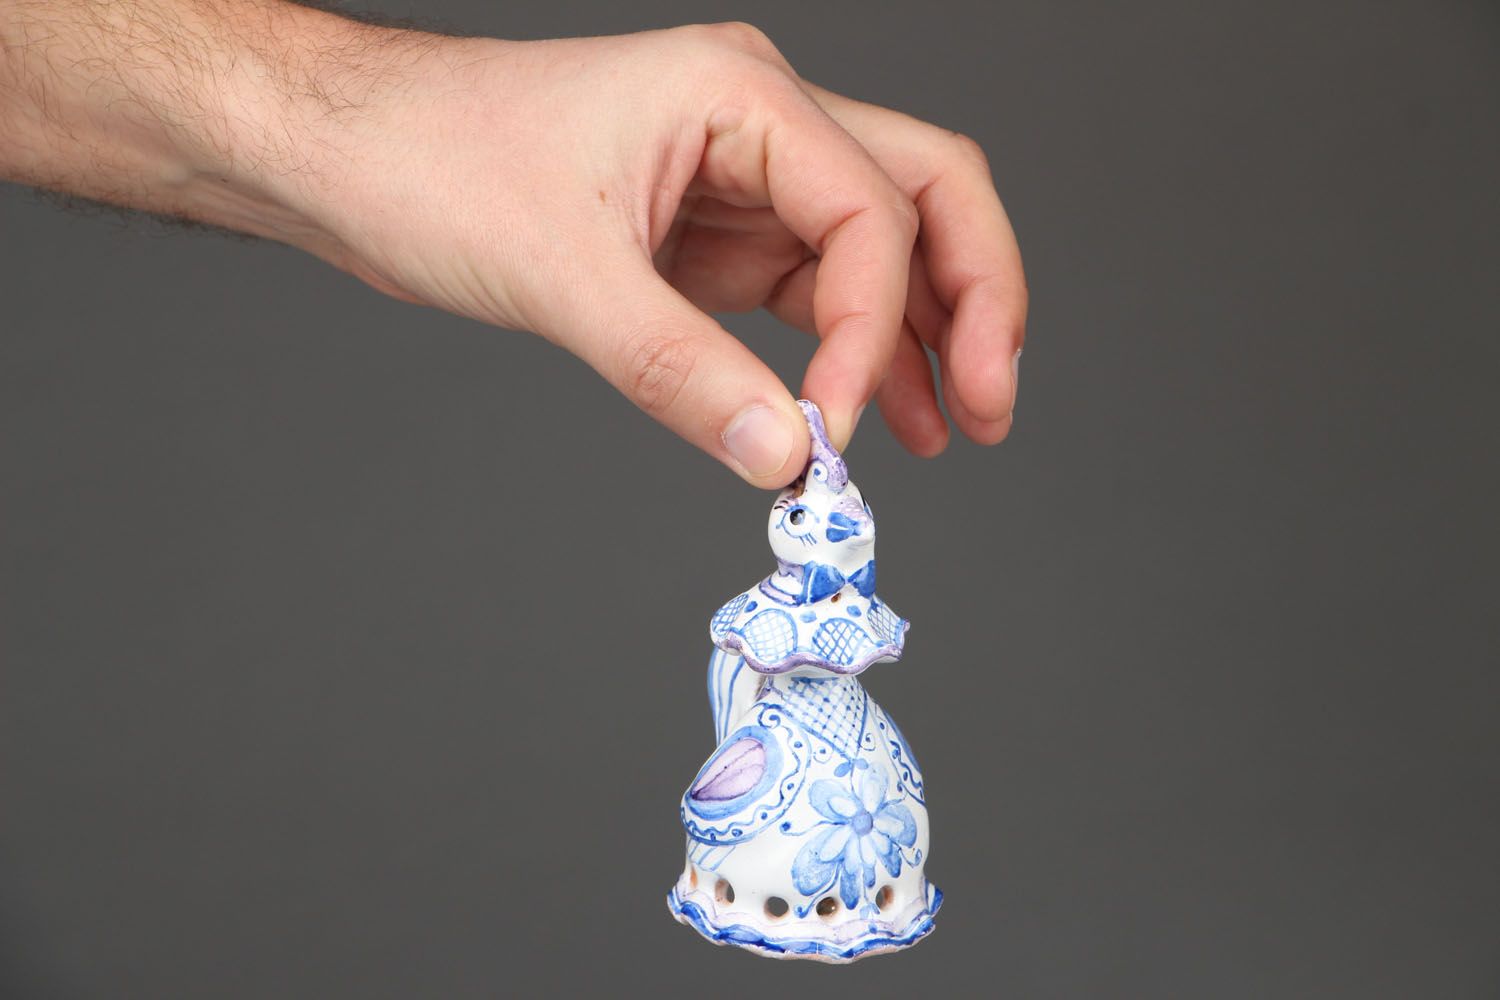 Painted ceramic bell photo 4